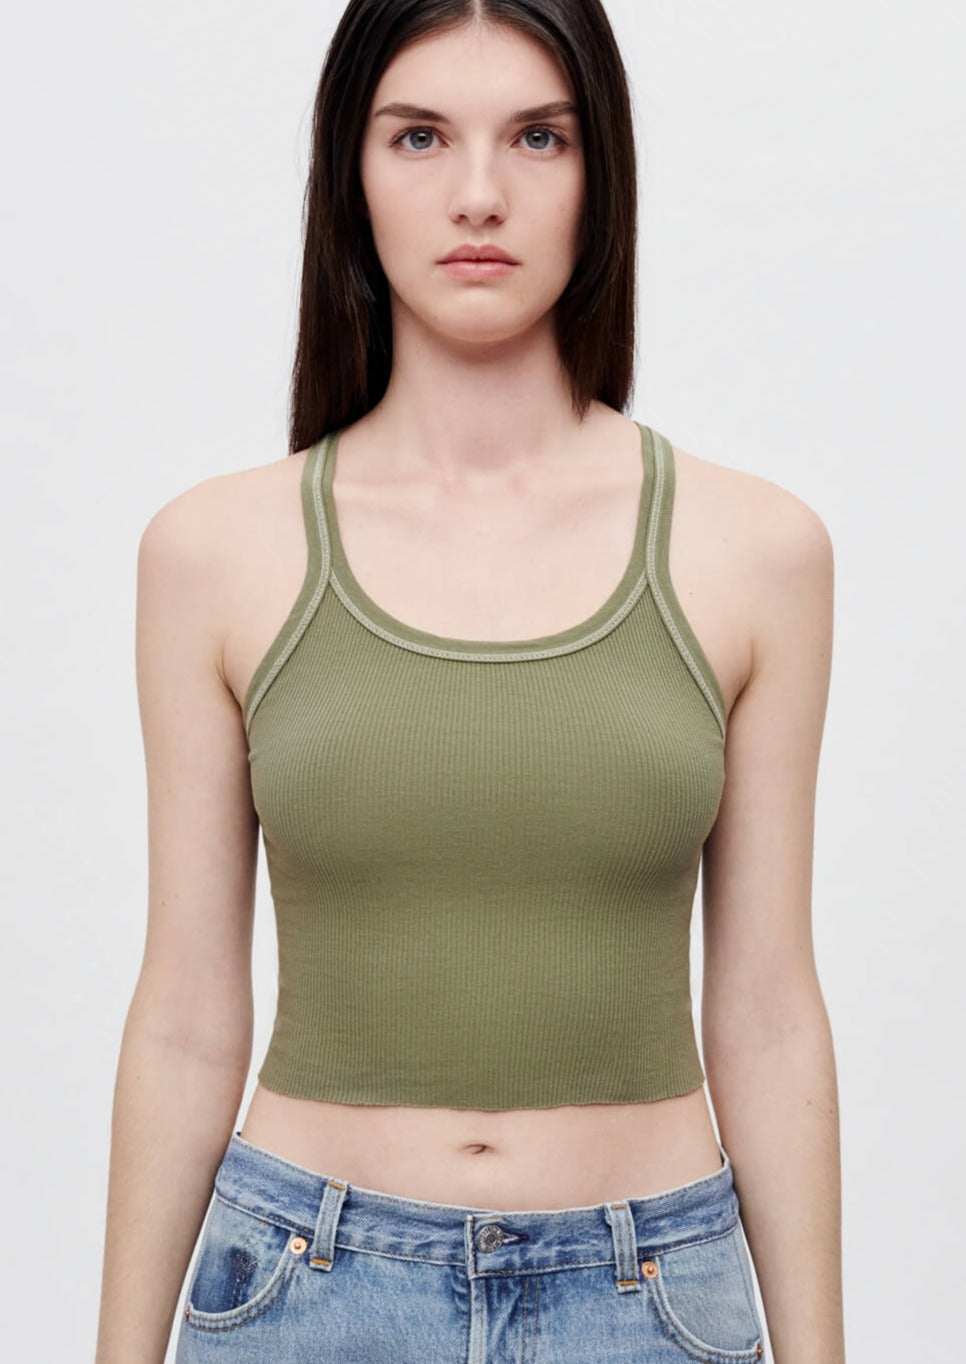 A young woman with long dark hair is wearing a sleeveless RE/DONE Cropped Rib Bayleaf Tank in olive green and light blue jeans. The cropped length top accentuates her outfit as she stands against a plain white background, looking directly at the camera with a neutral expression.